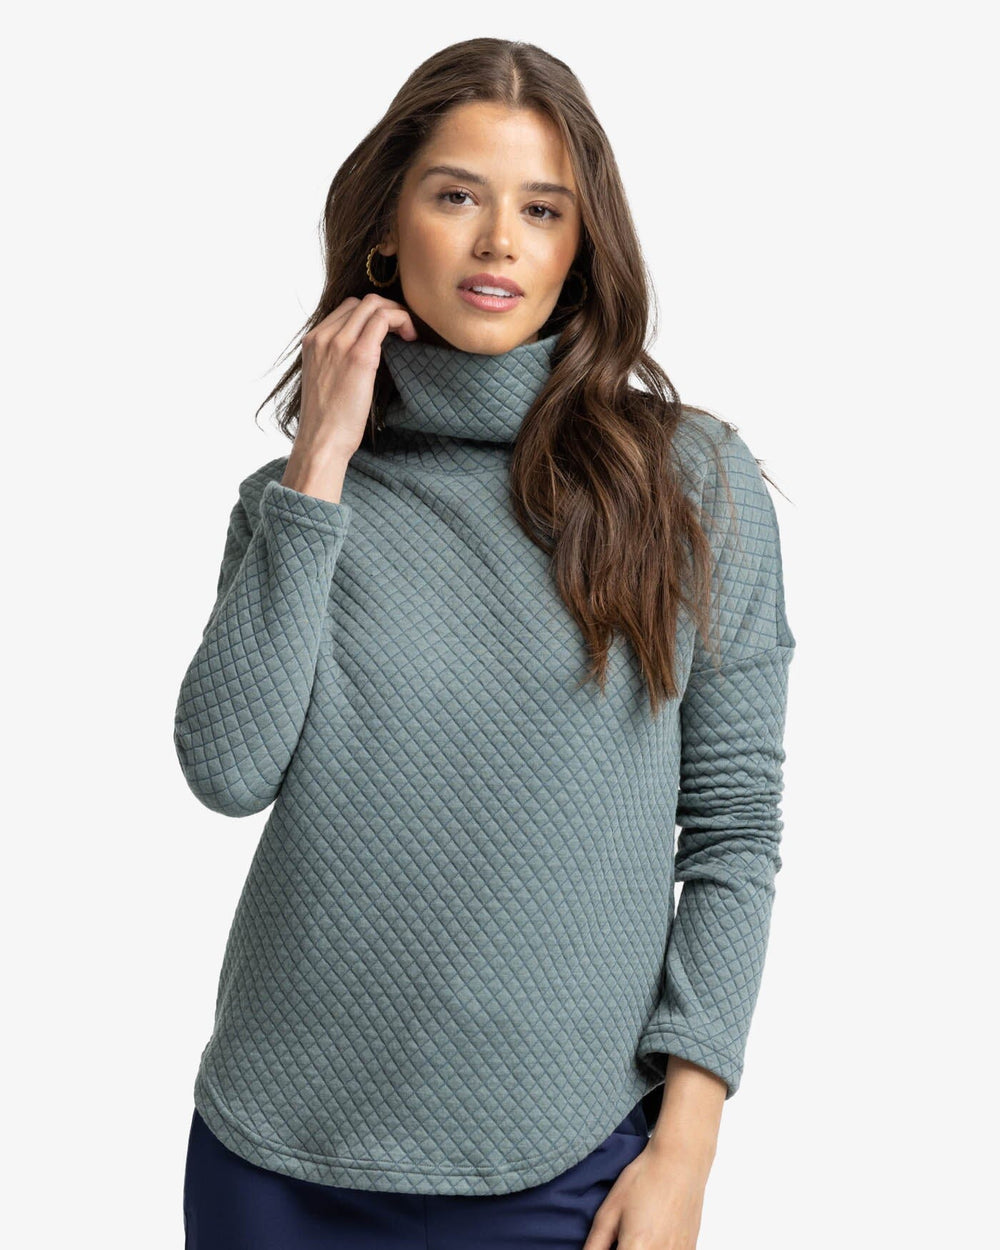 The front view of the Southern Tide Mellie MockNeck Sweatshirt by Southern Tide - Balsam Green